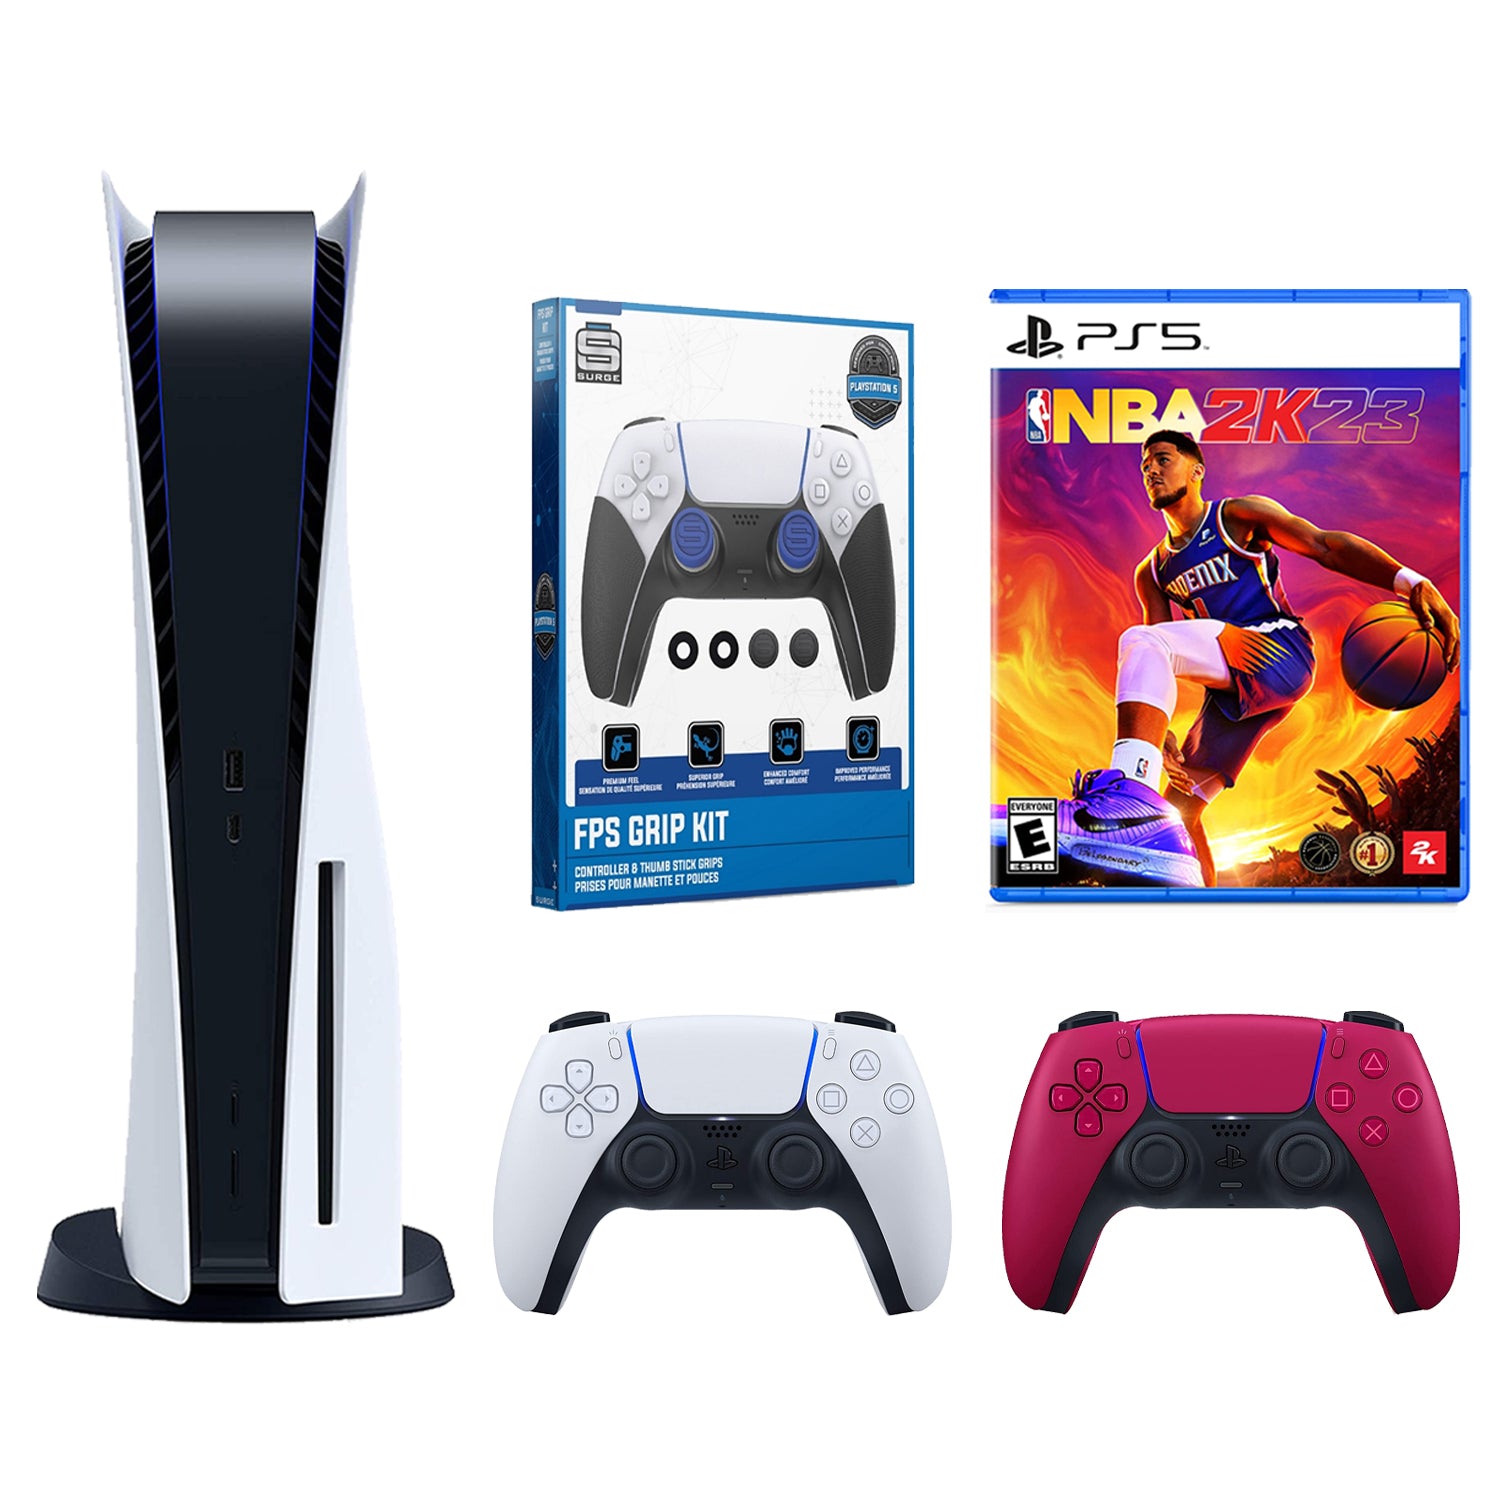 Sony Playstation 5 Disc with NBA 2K23, Extra Controller and FPS Grip Kit Bundle - Cosmic Red - Pro-Distributing